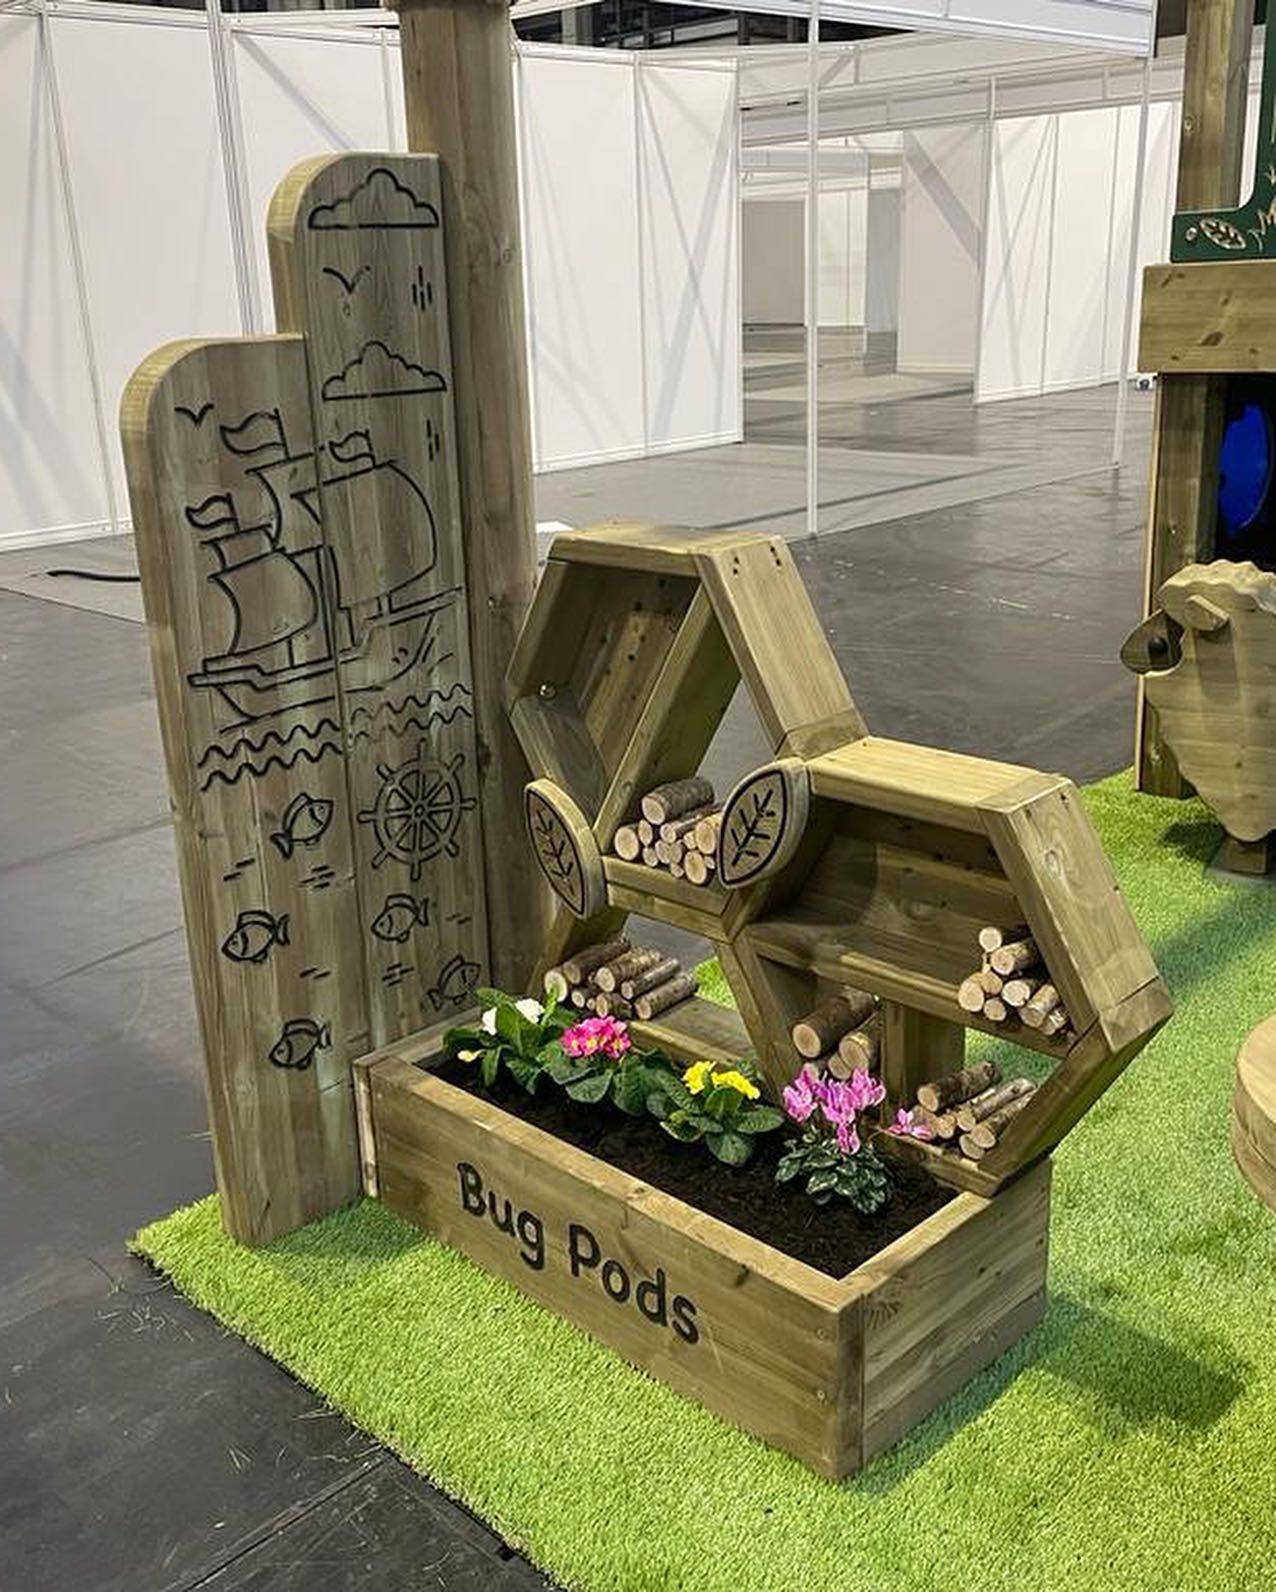 Playground wooden planters, totems and bug pods